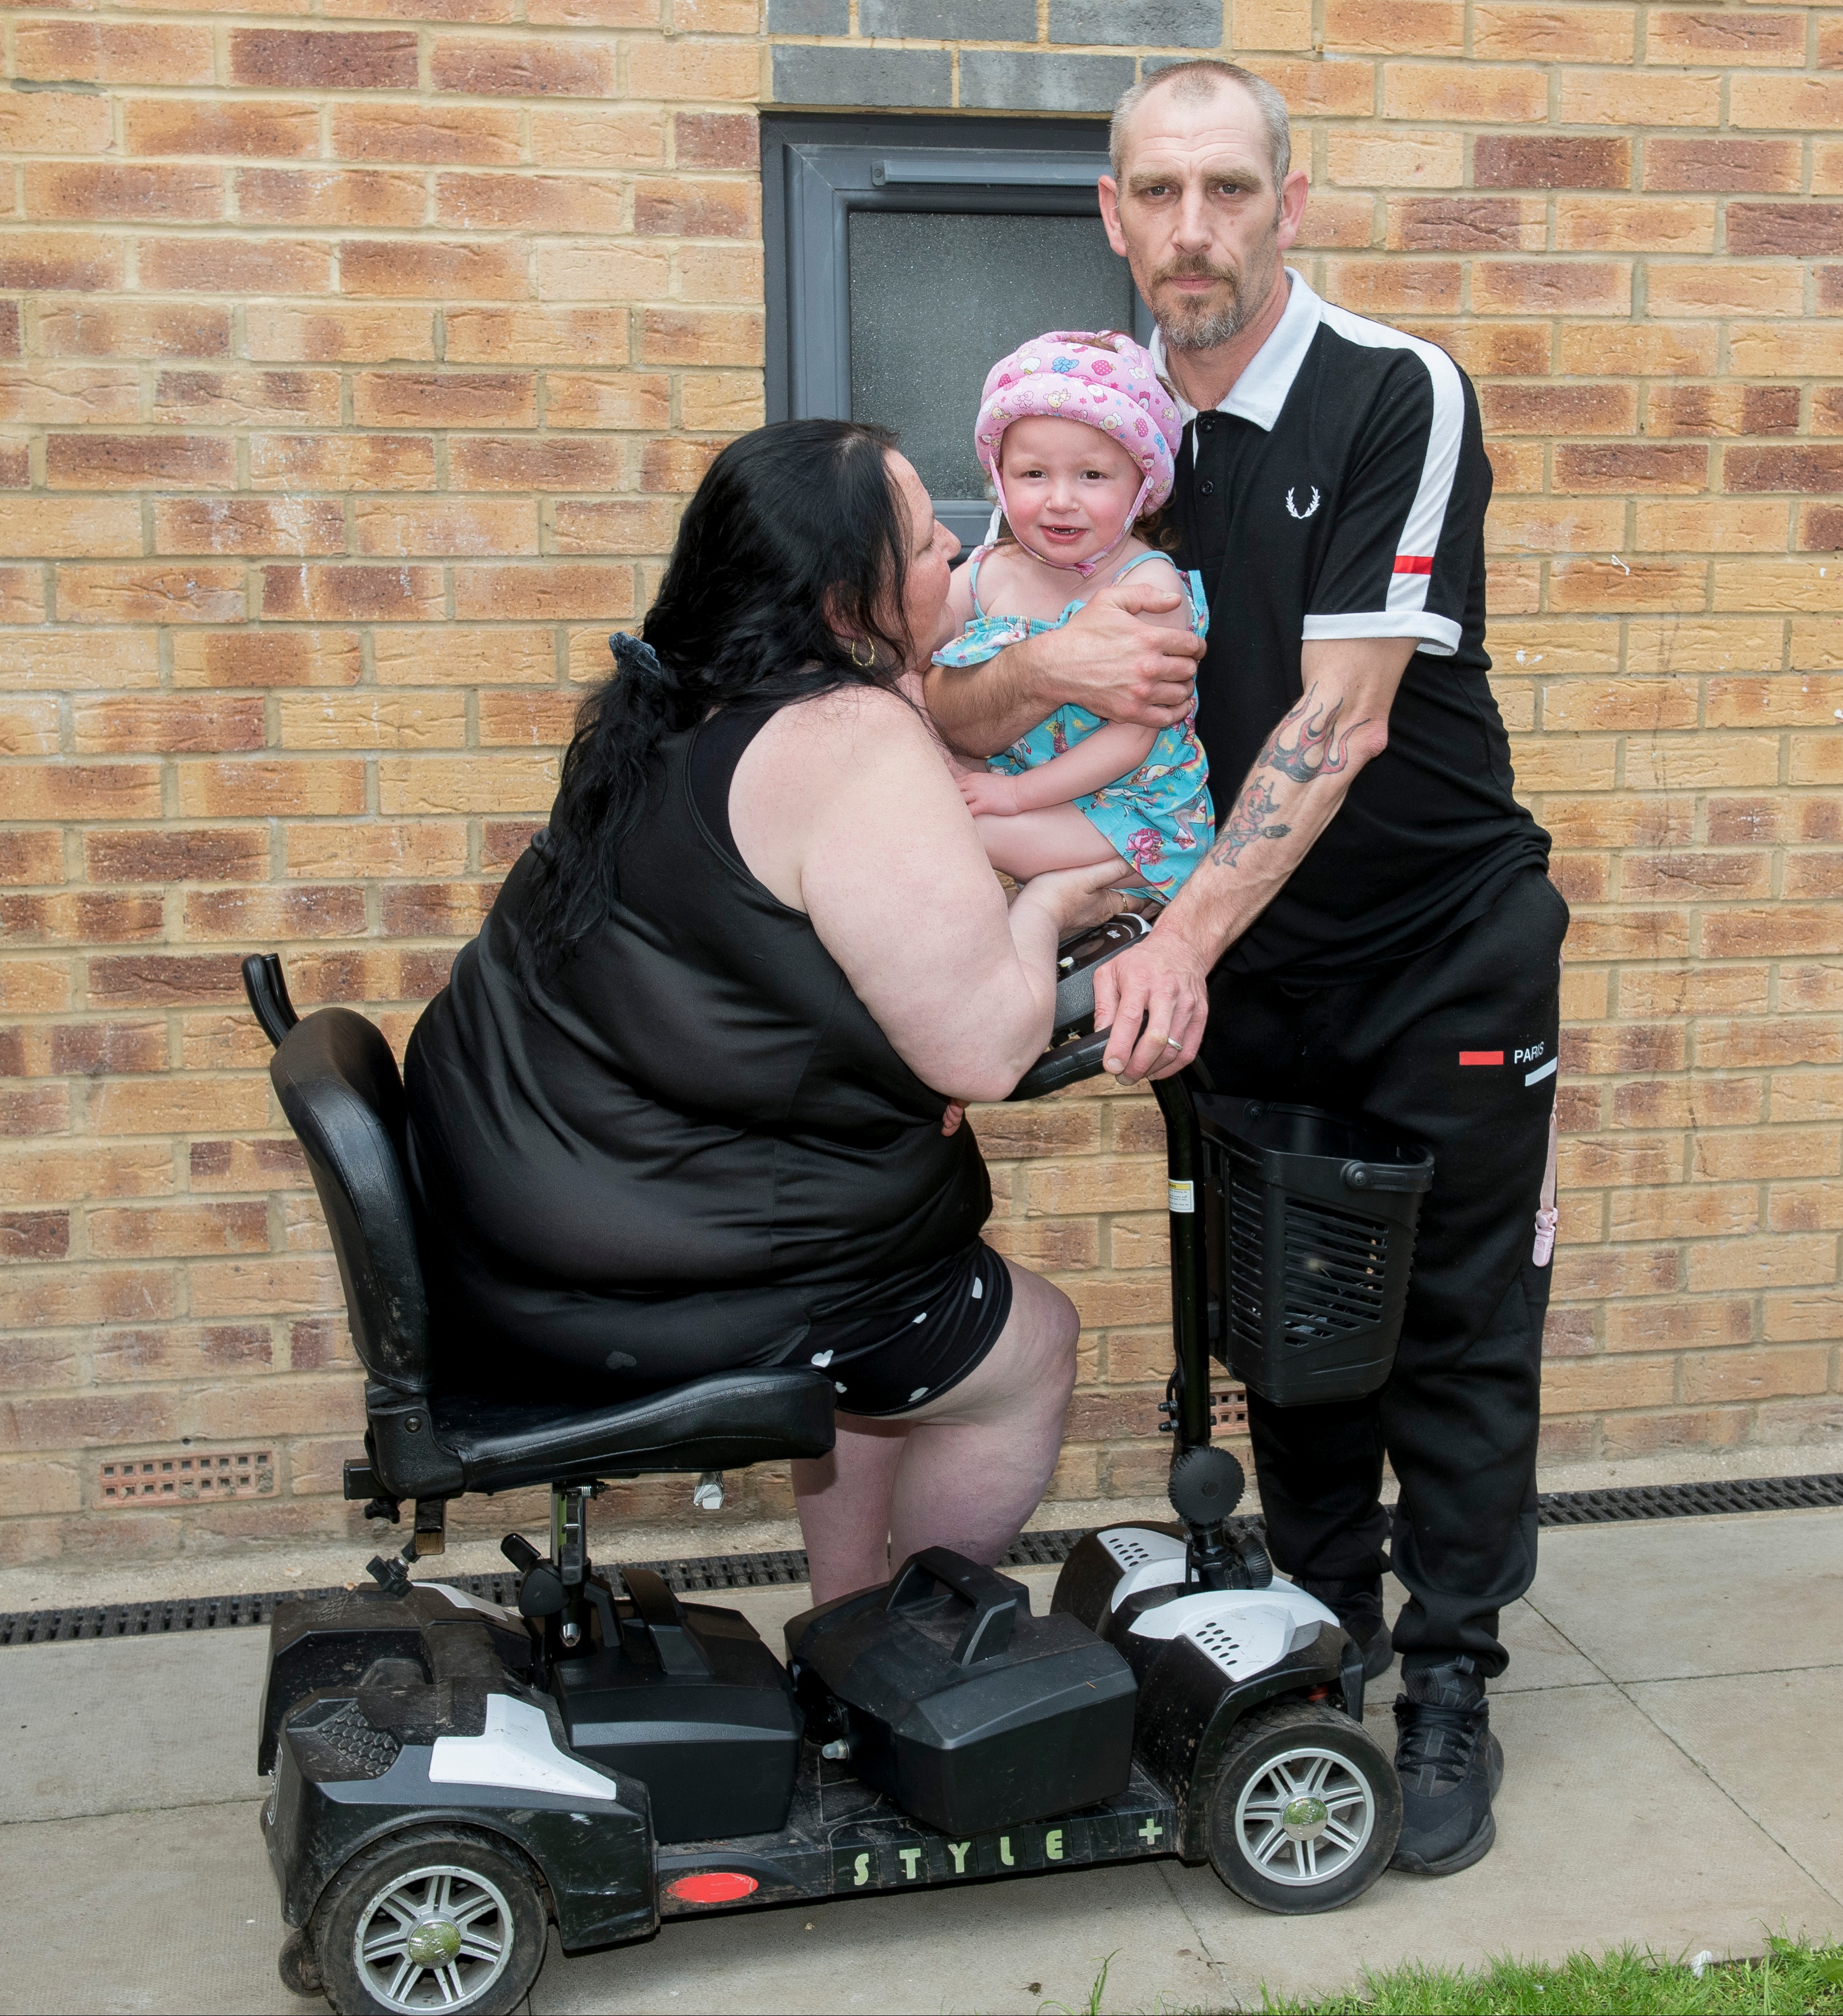 Lucy and Darren Fowles, pictured here with one of their children, have been living among sewage for the last year